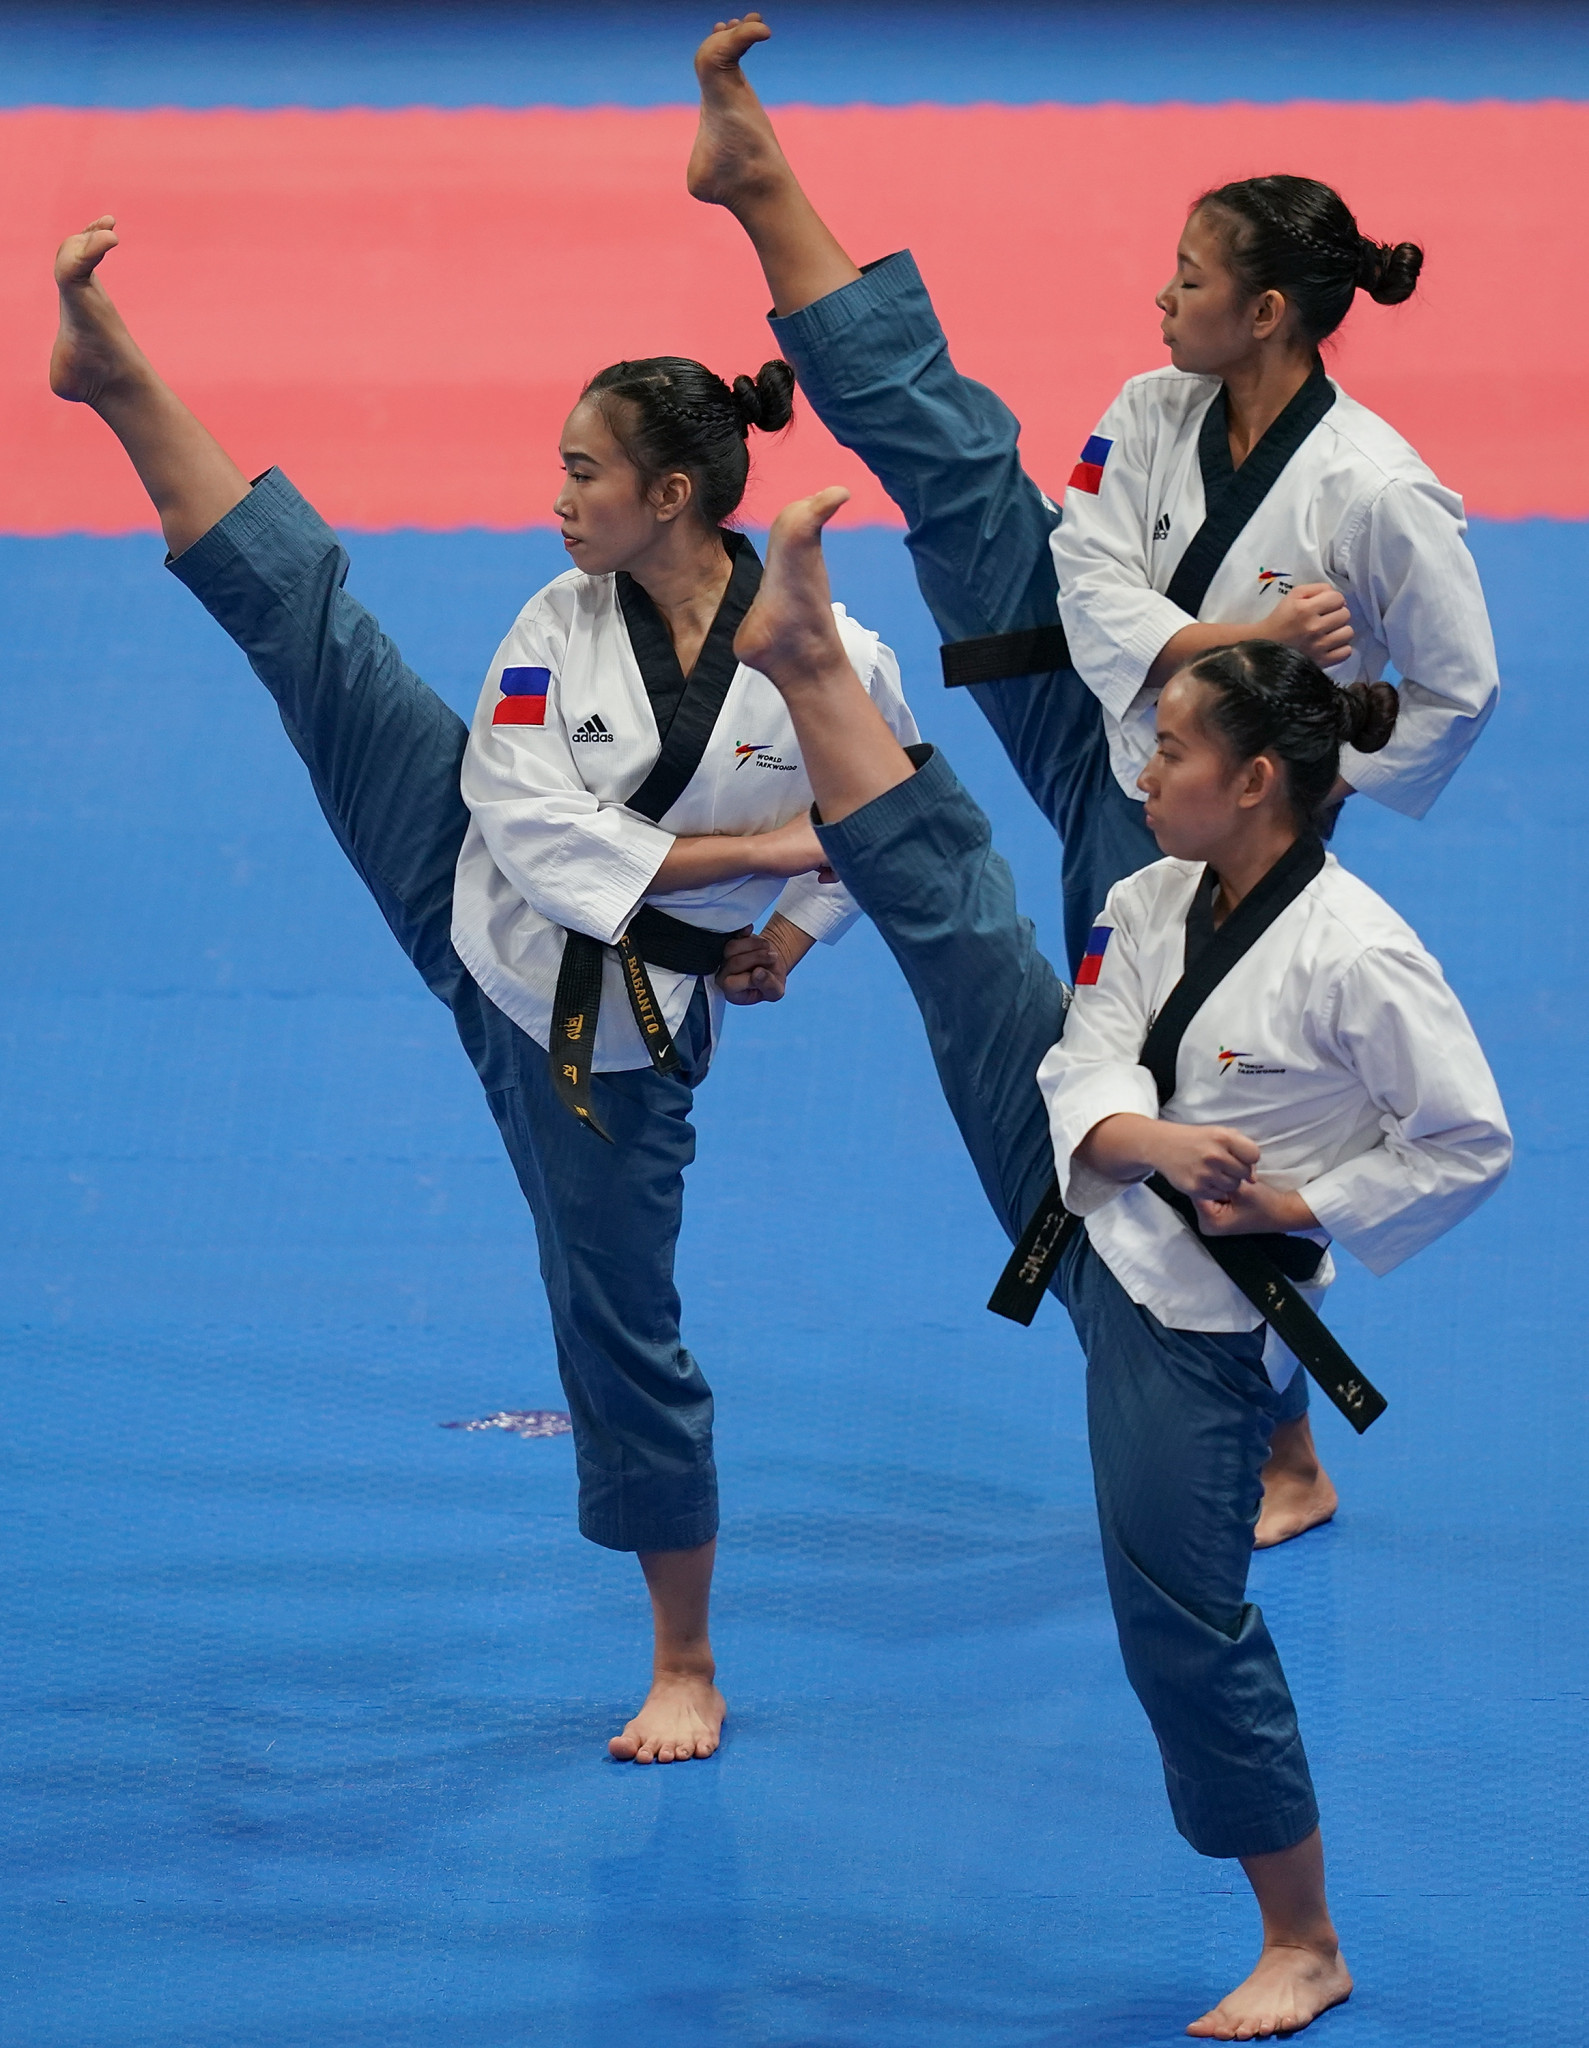 The world's best in poomsae taekwondo will gather in Taipei ©Getty Images